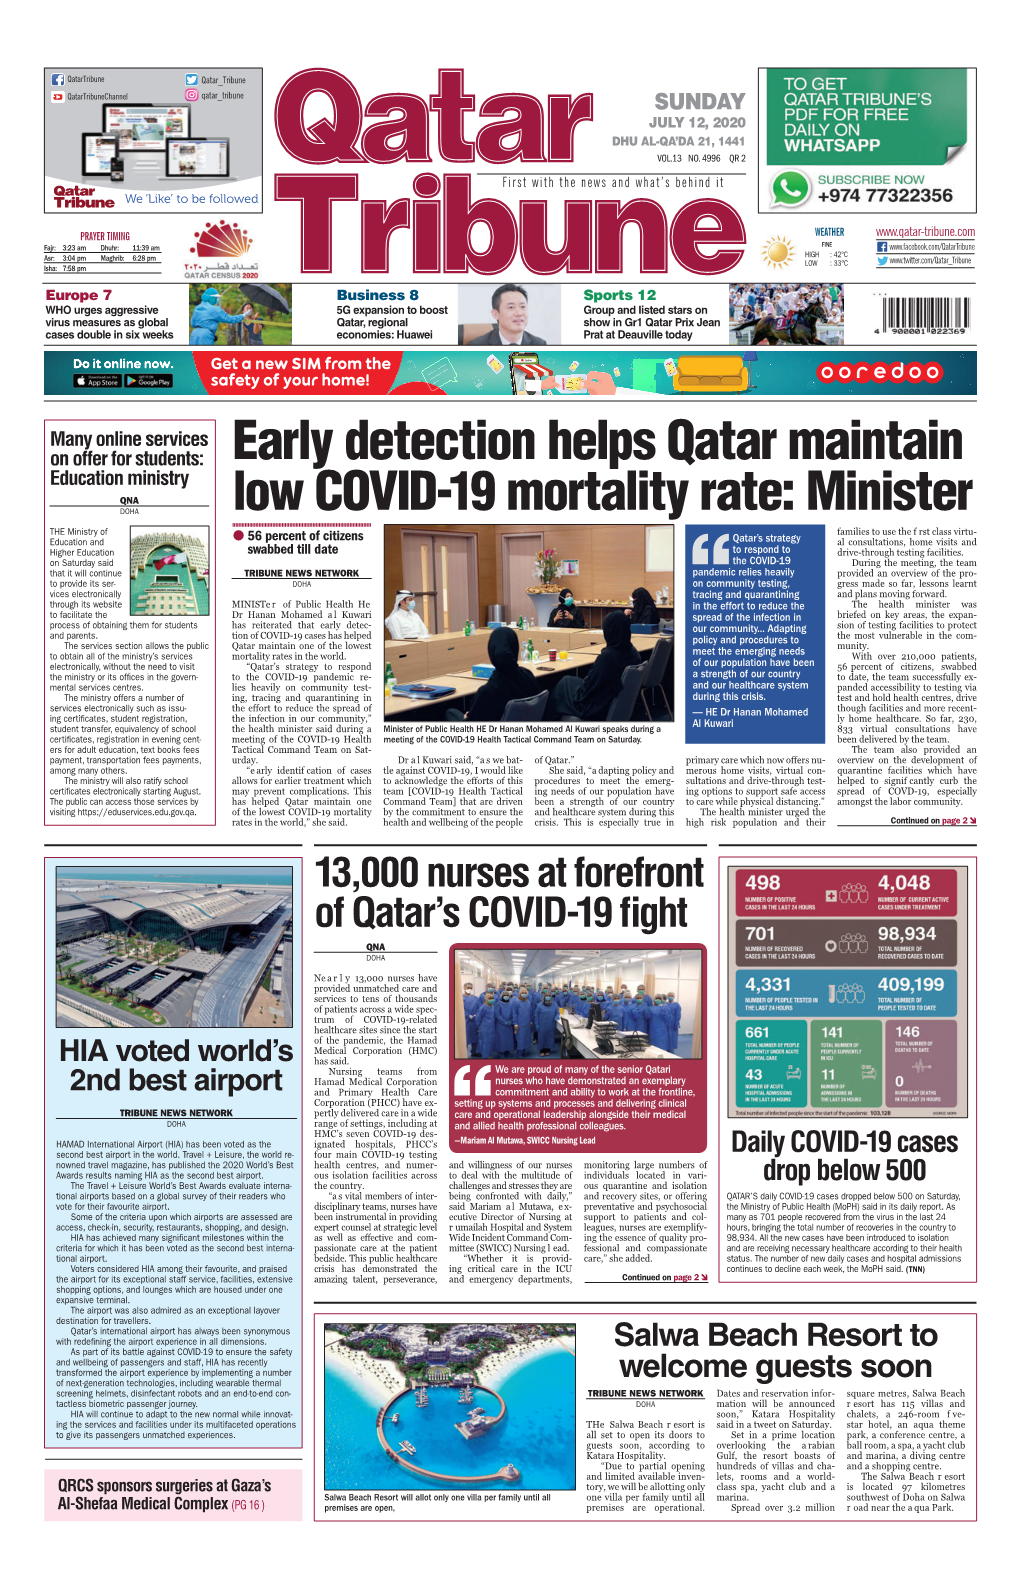 Early Detection Helps Qatar Maintain Low COVID-19